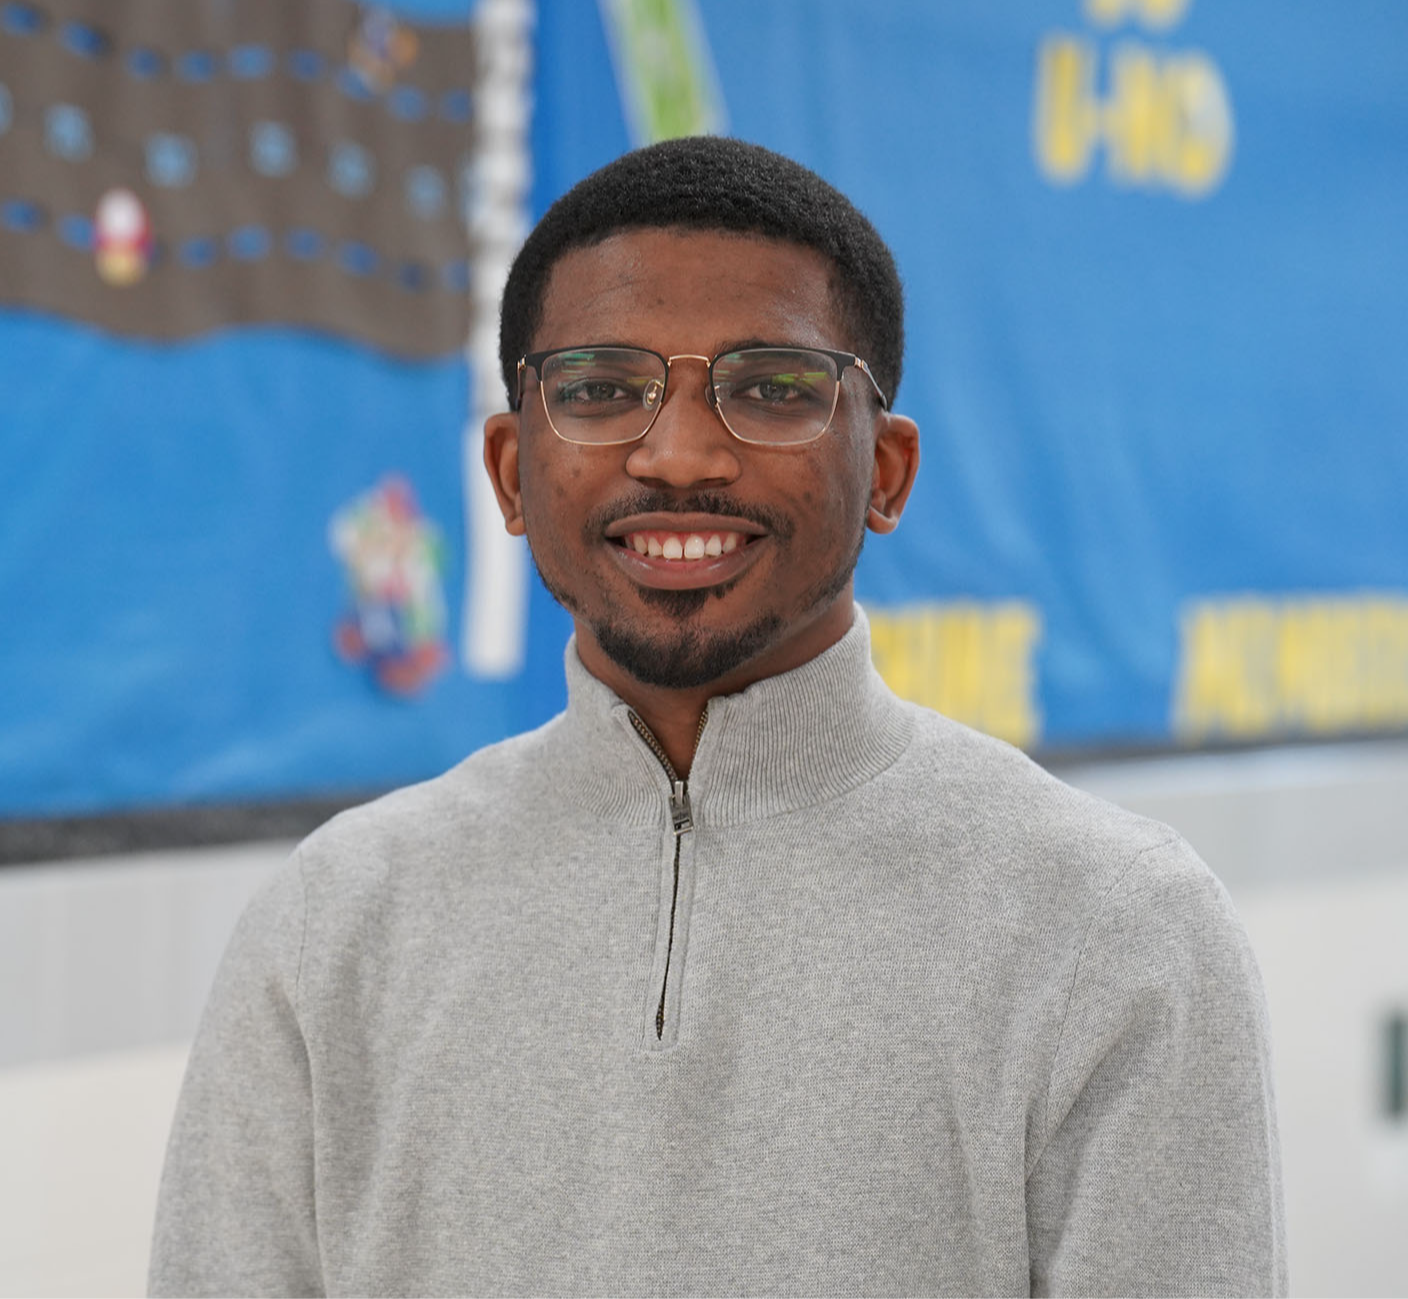 African American man wearing a gray sweater in a hallway